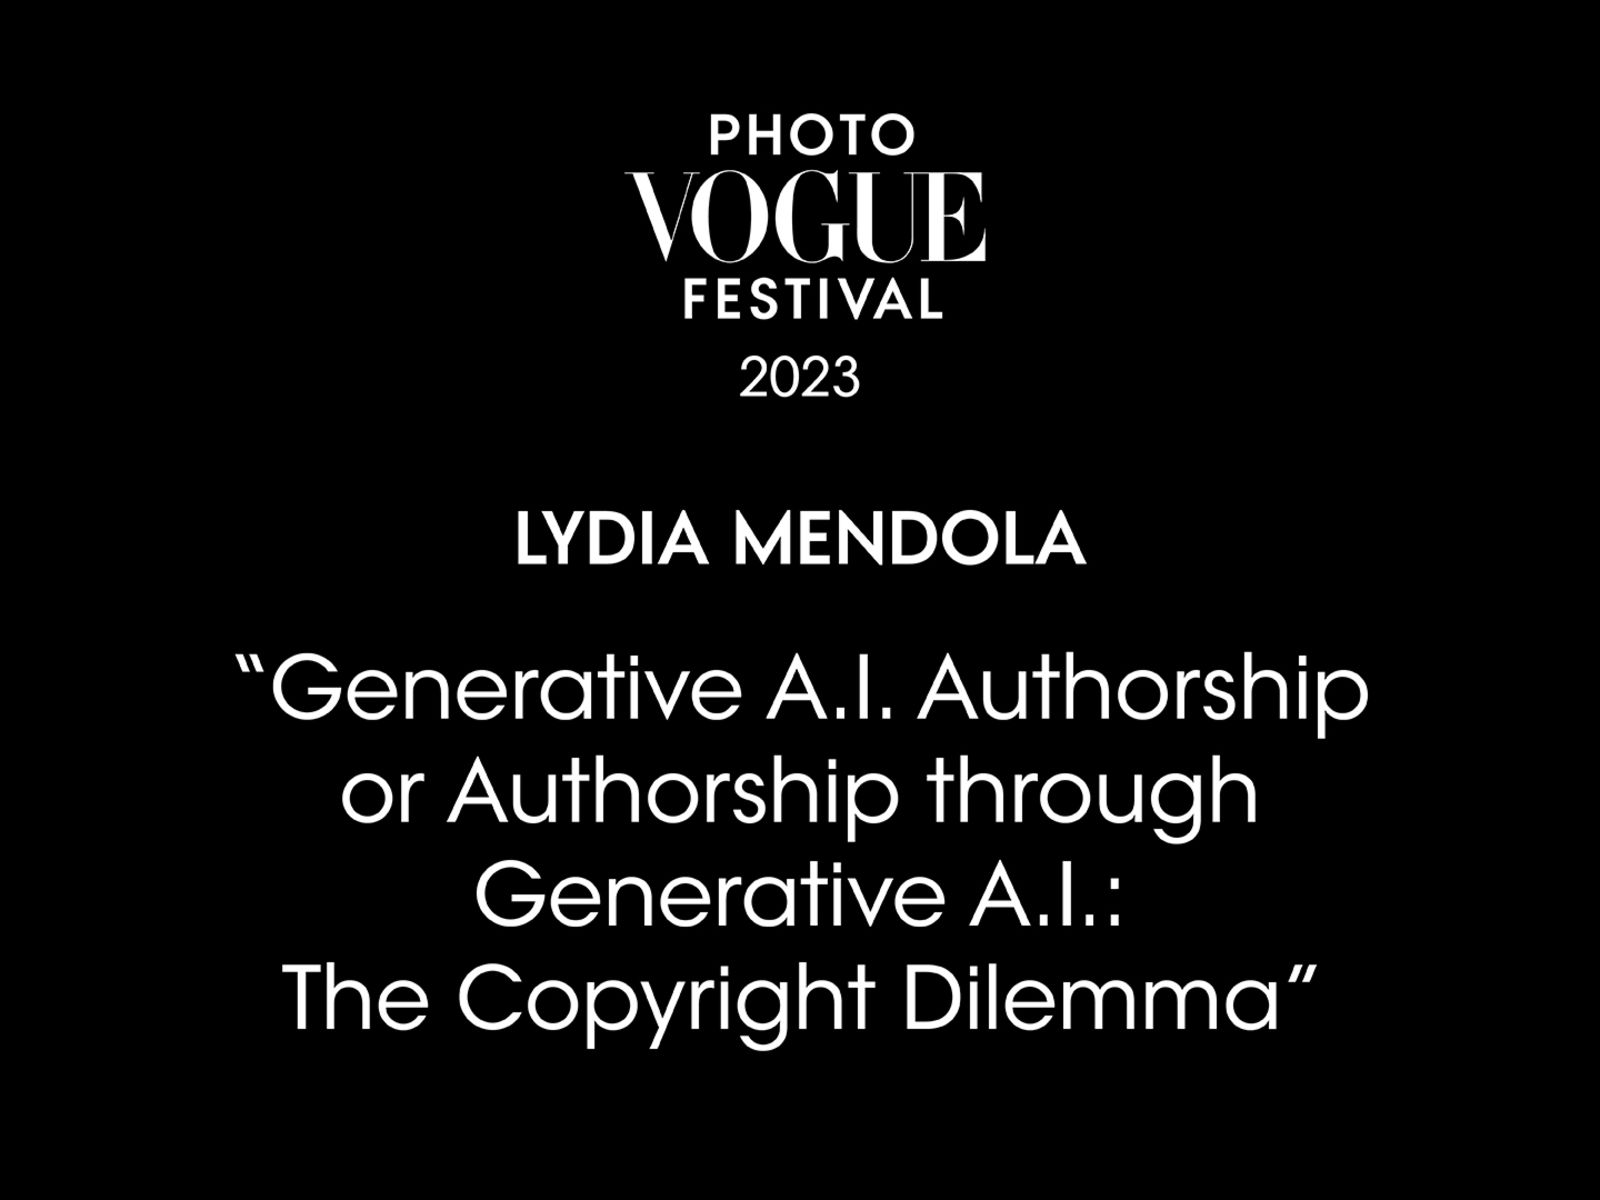 Generative A.I. Authorship or Authorship through Generative A.I.: The Copyright Dilemma | PhotoVogue Festival 2023: What Makes Us Human? Image in the Age of A.I.